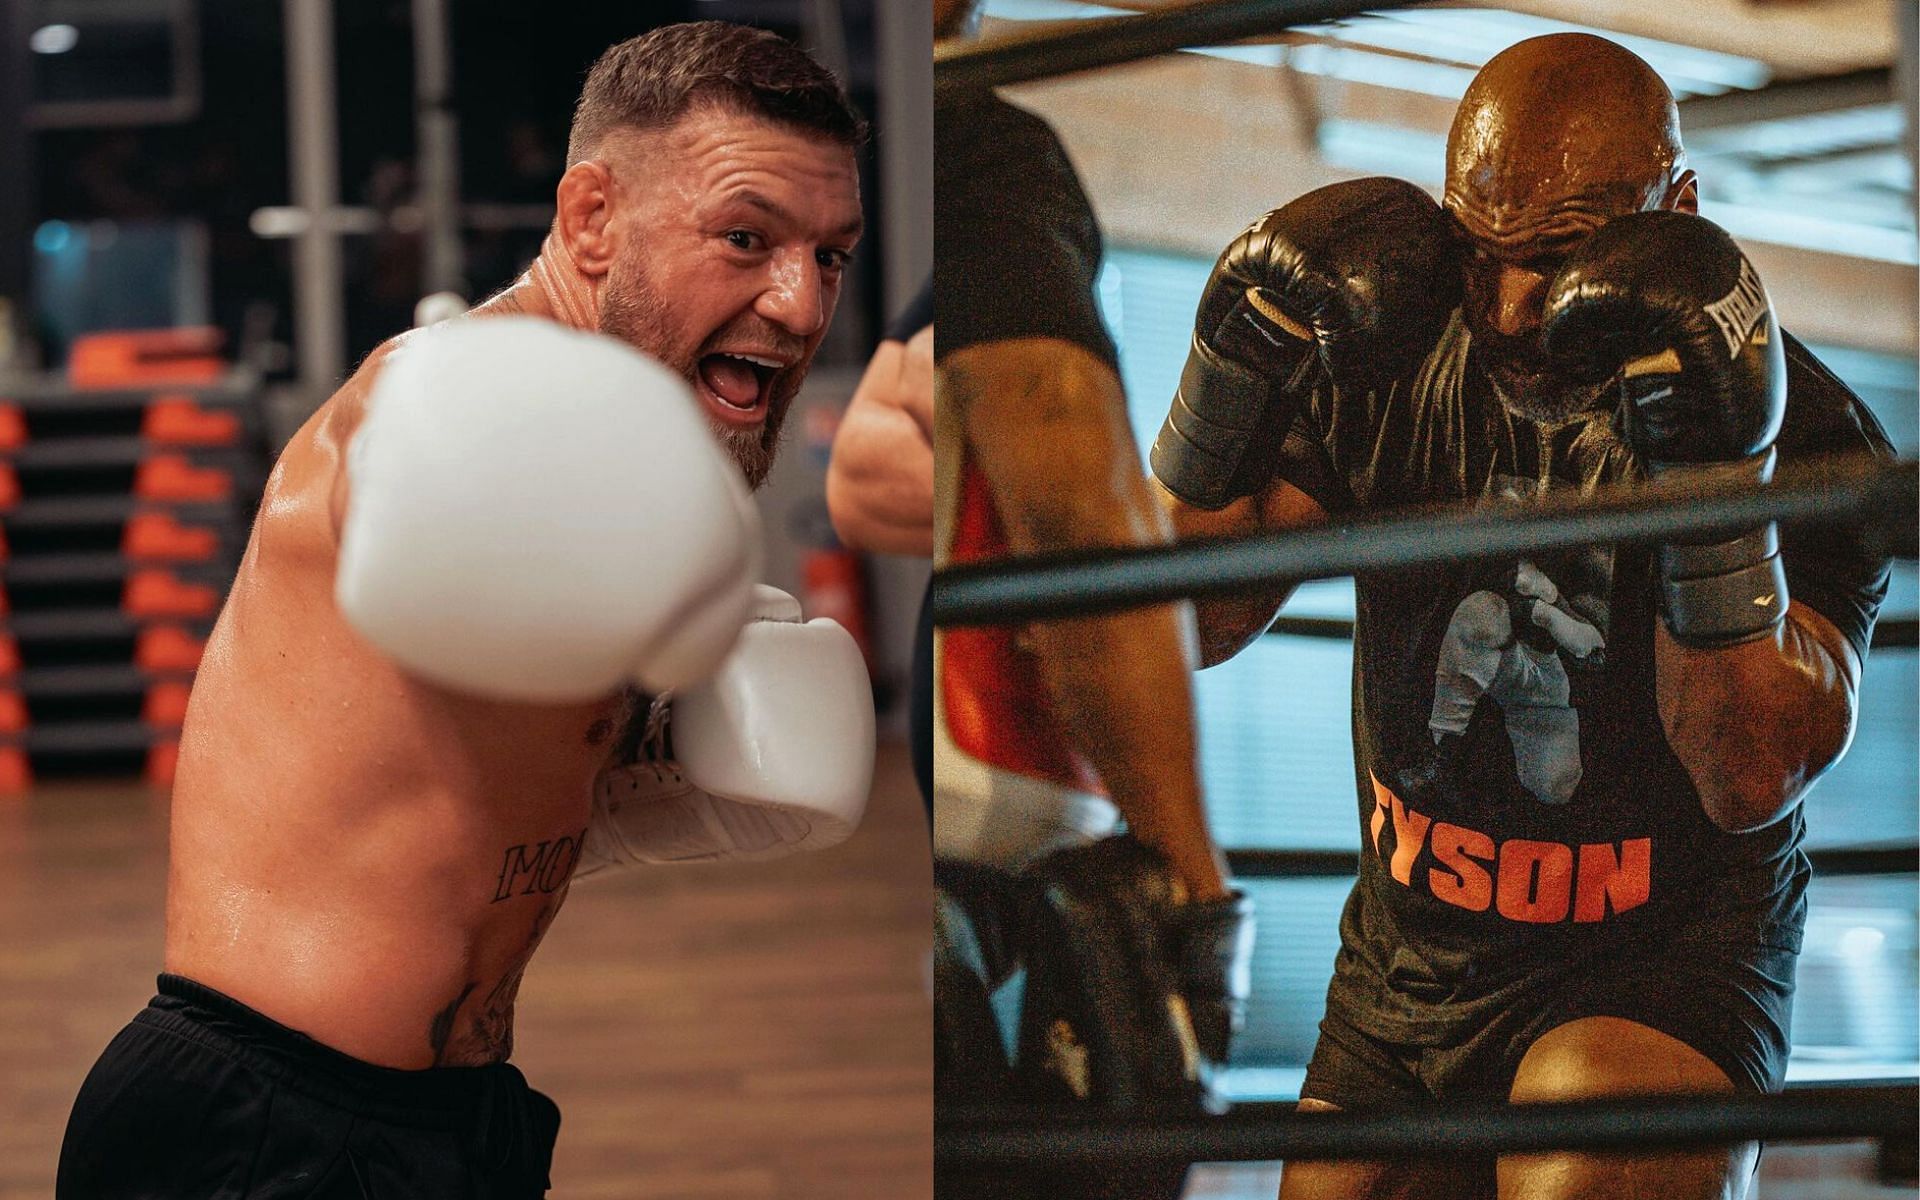 Conor McGregor (left), Mike Tyson (right) [Images courtesy: @thenotoriousmma and @miketyson via Instagram]